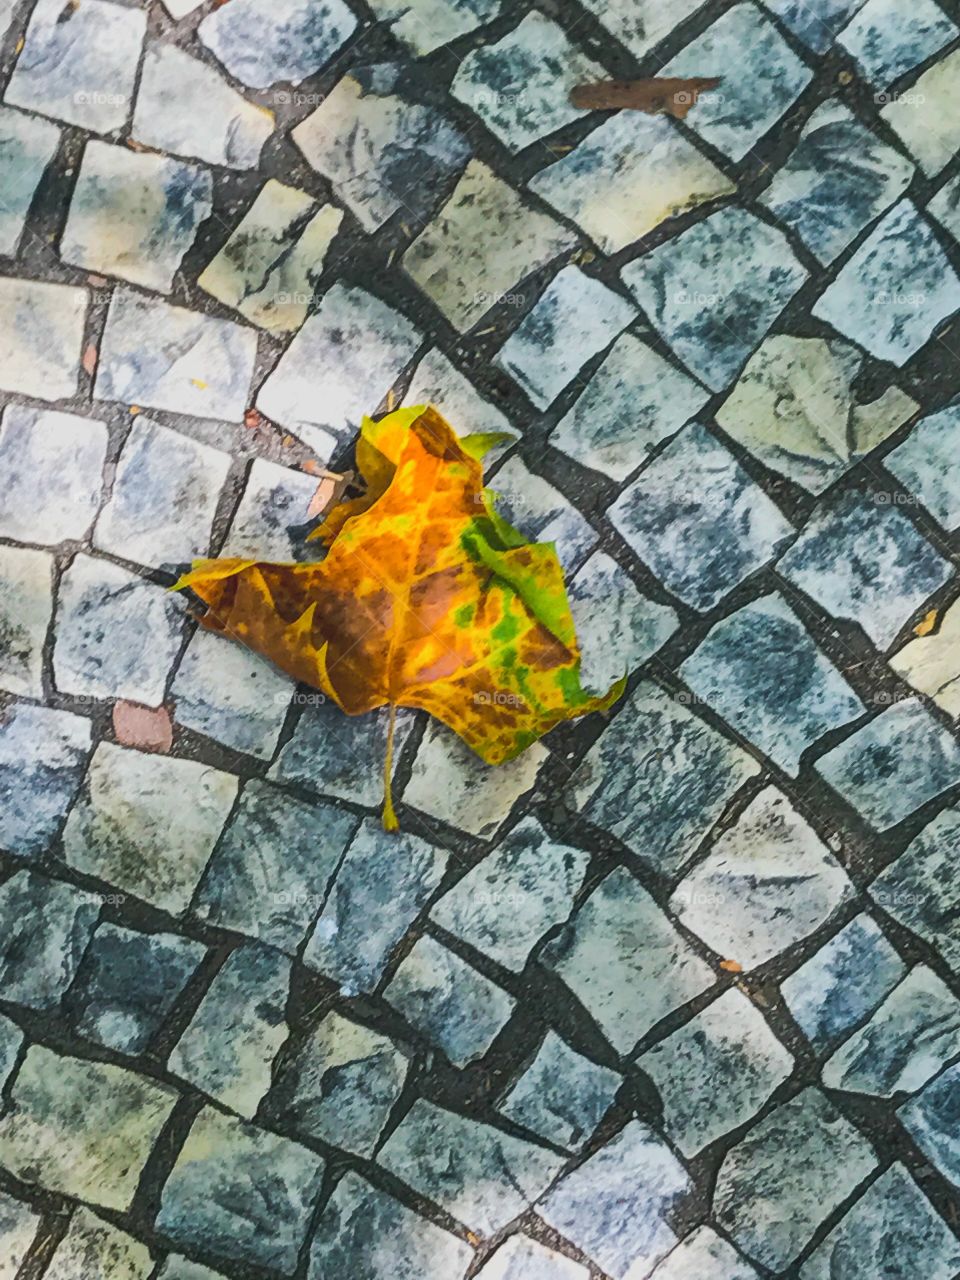 Leaf on textured stone - Textures of the World Mission